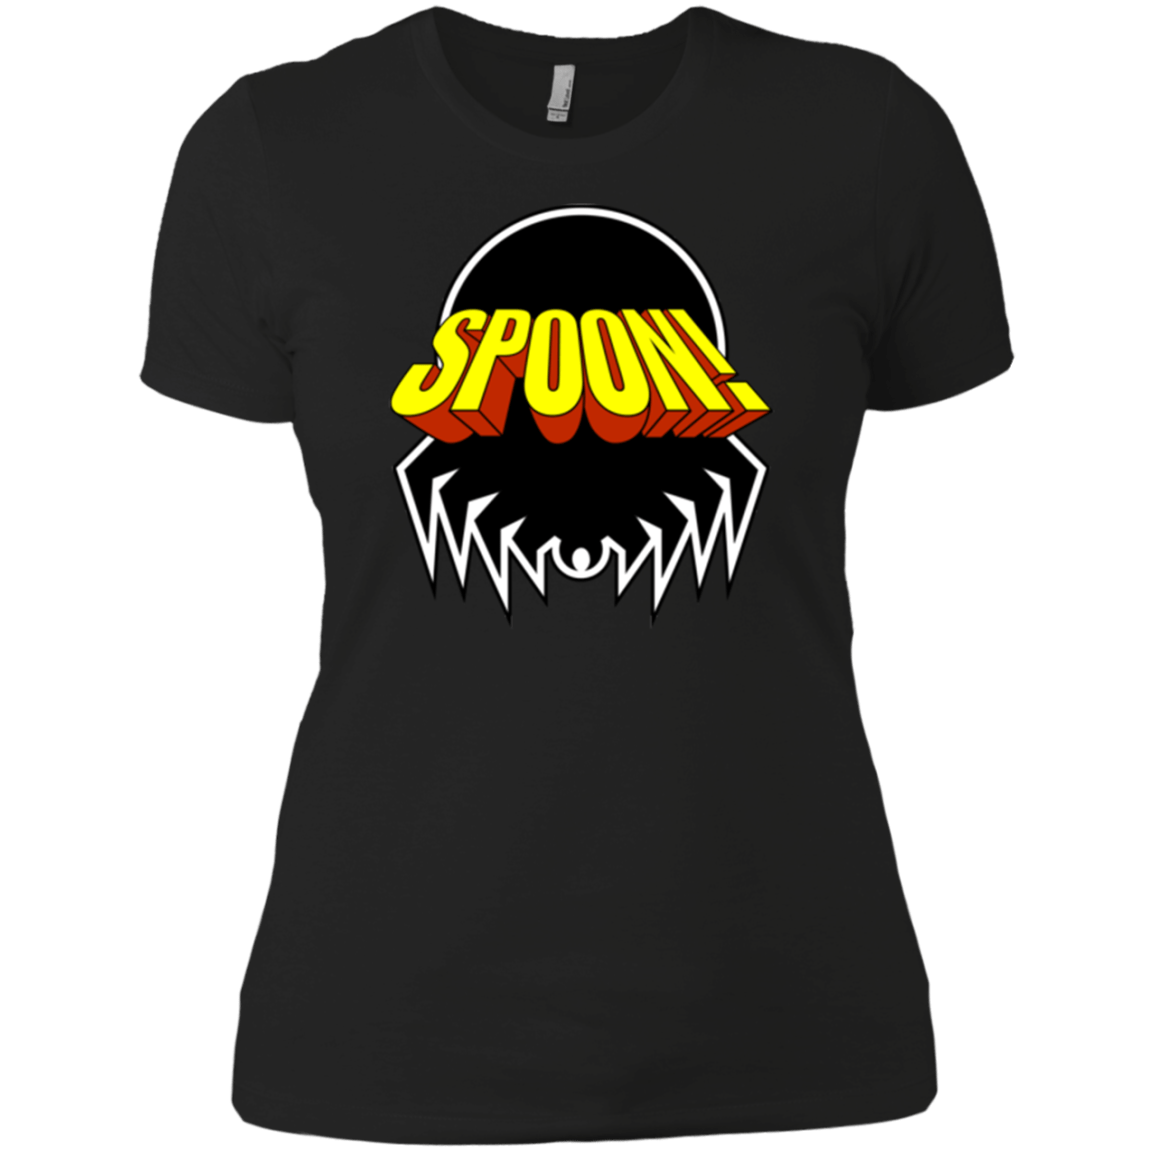 T-Shirts Black / X-Small Honk If You Love Justice! Women's Premium T-Shirt